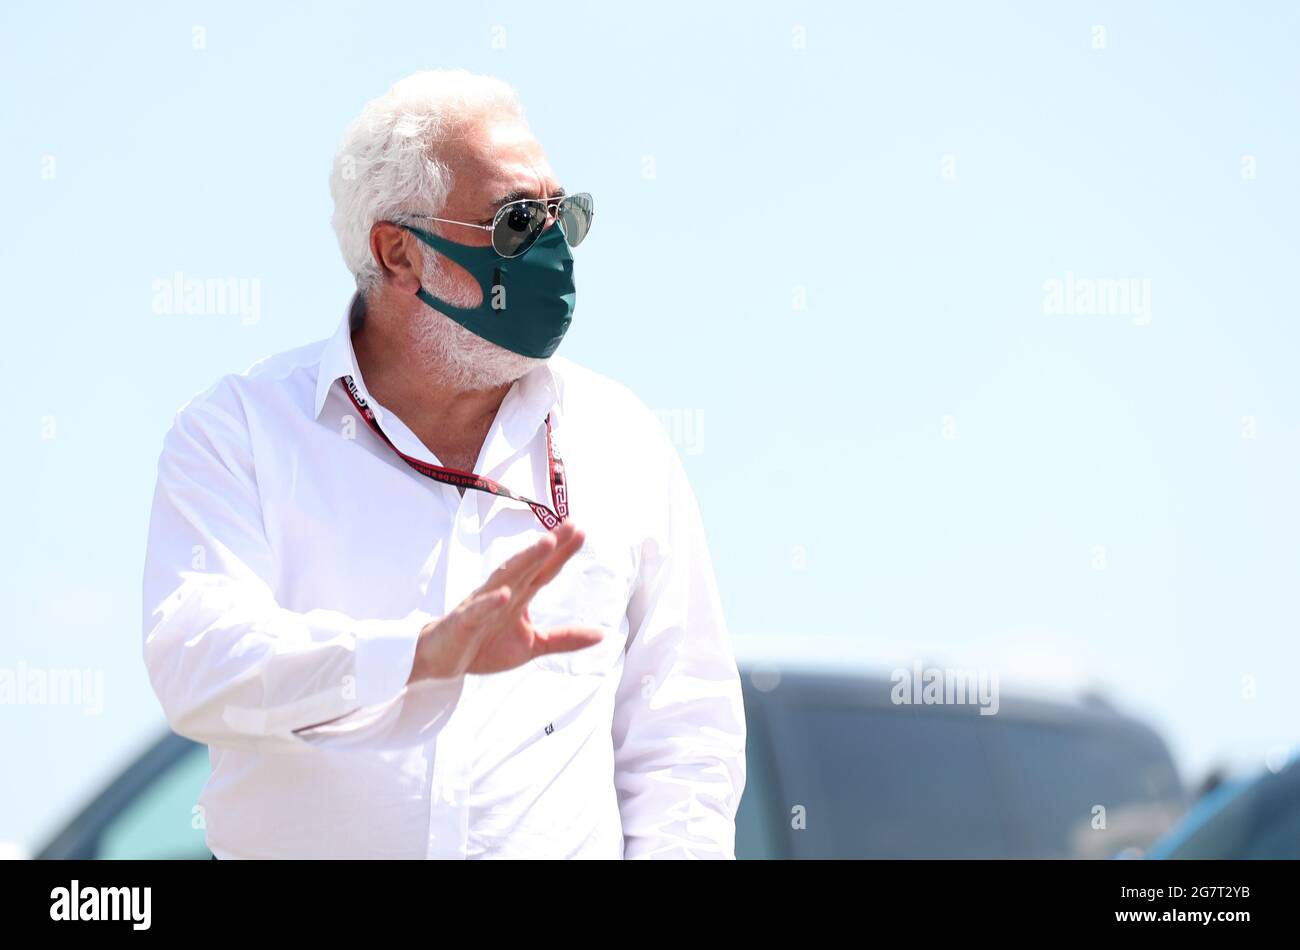 Part Owner of Aston Martin F1 Team Lawrence Stroll arrives for practice for the British Grand Prix at Silverstone, Towcester. Picture Date: Friday July 16, 2021. Stock Photo